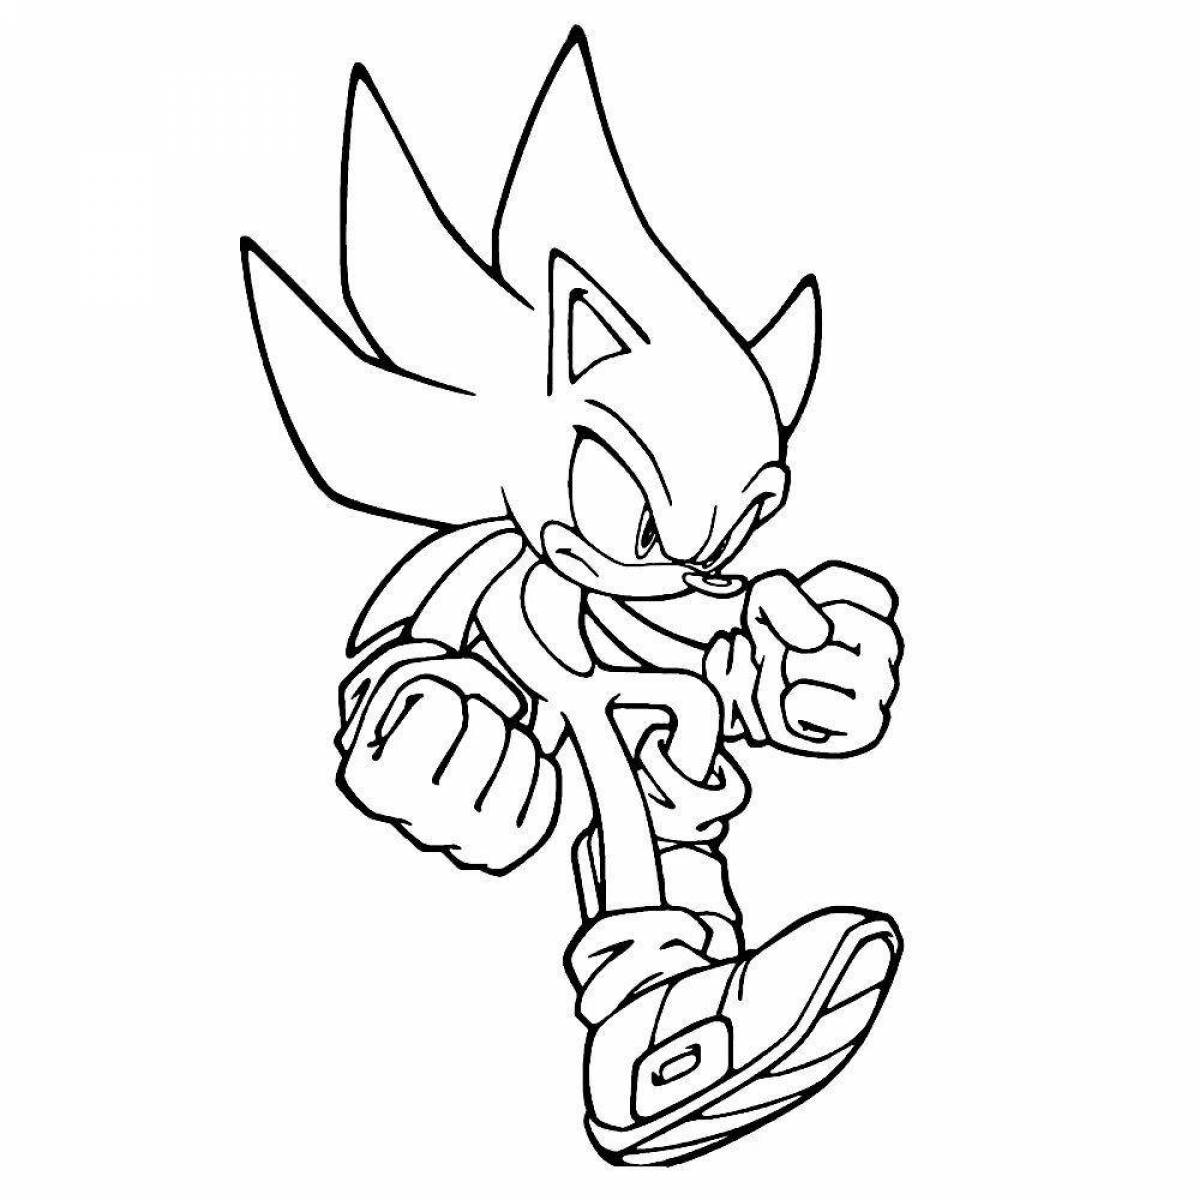 Super sonic exe glowing coloring book